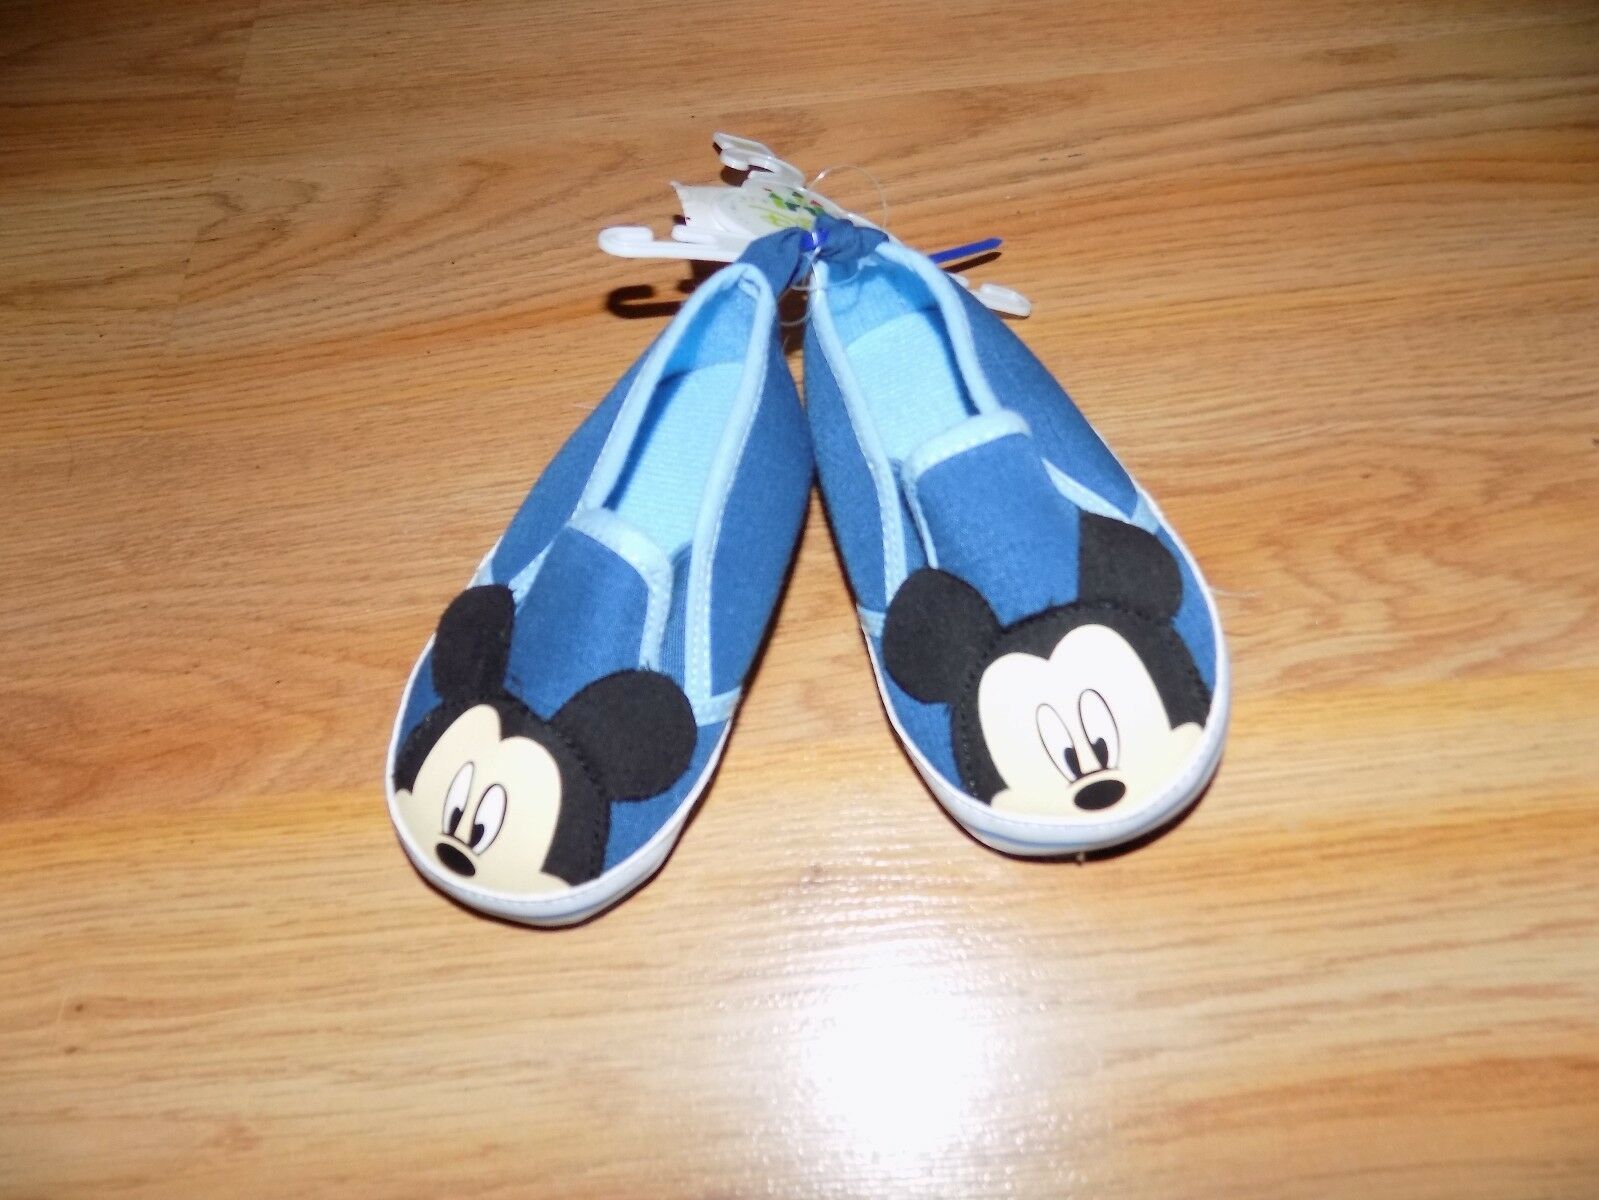 Infant Size 6-9 Months Disney Baby Blue Mickey Mouse Crib Shoes New  - $12.00